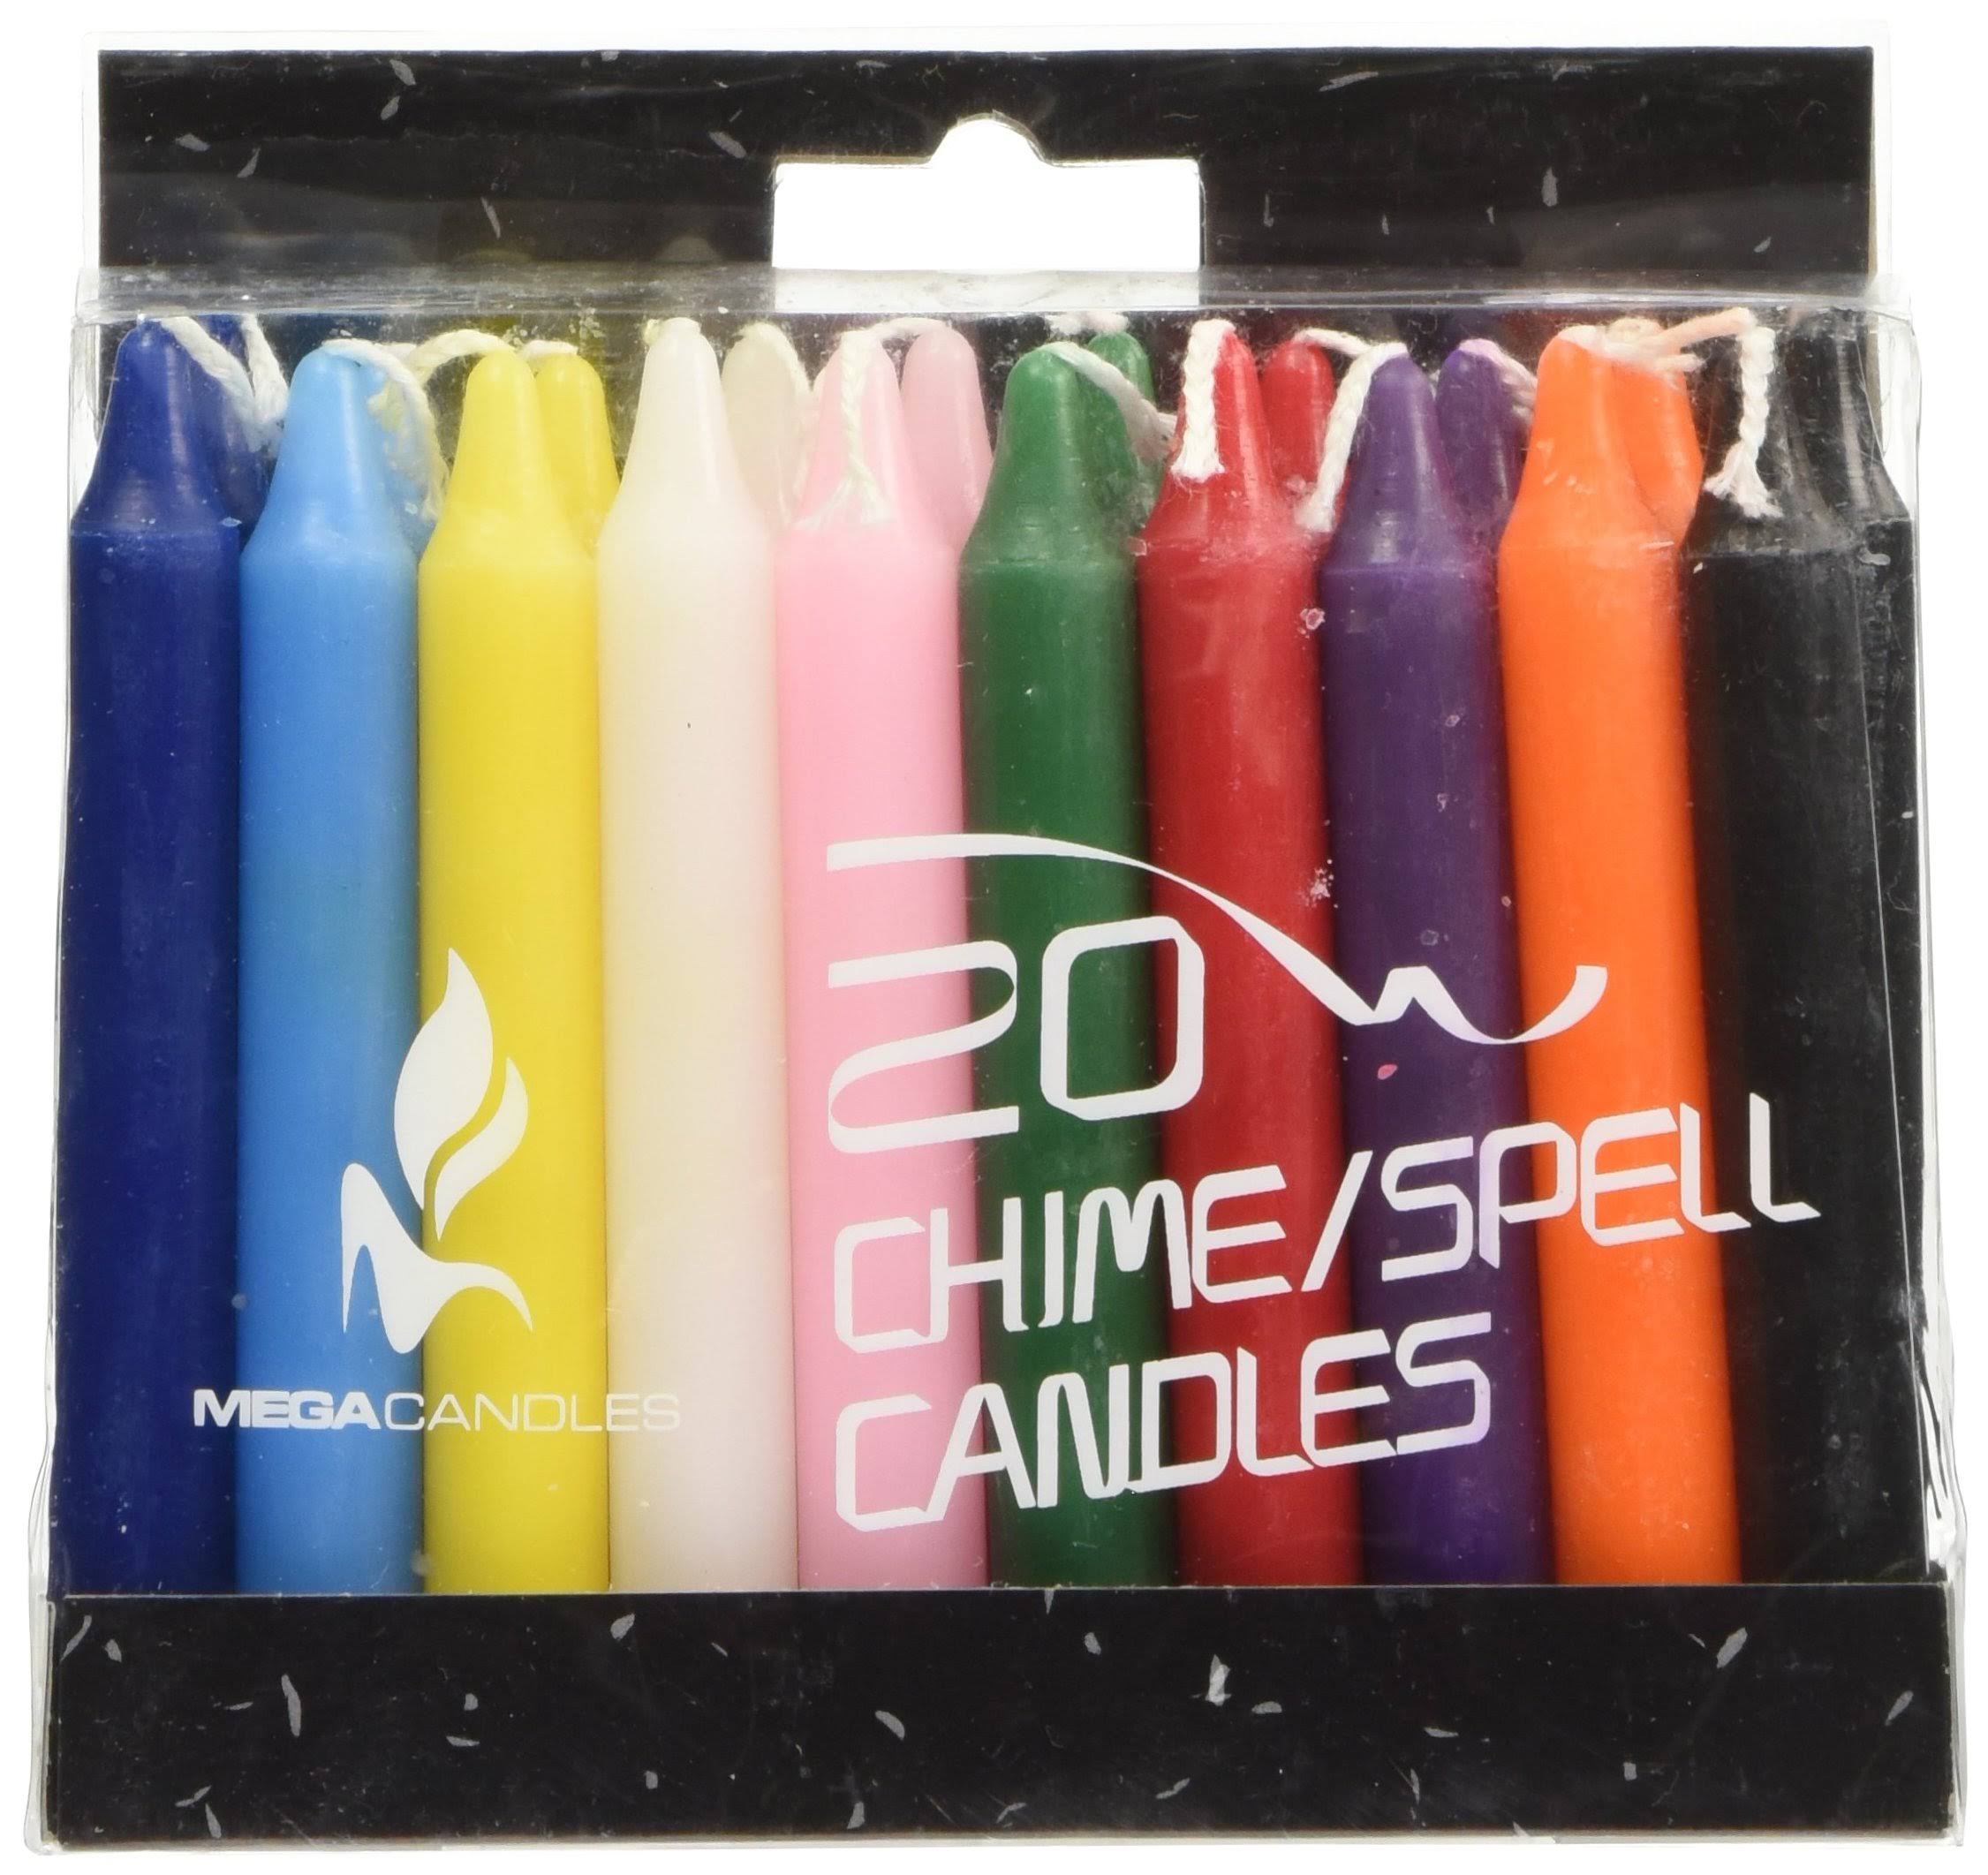 Mega Candles - Unscented 4" Mini Chime Ritual Spell Taper Candle - Set of 20